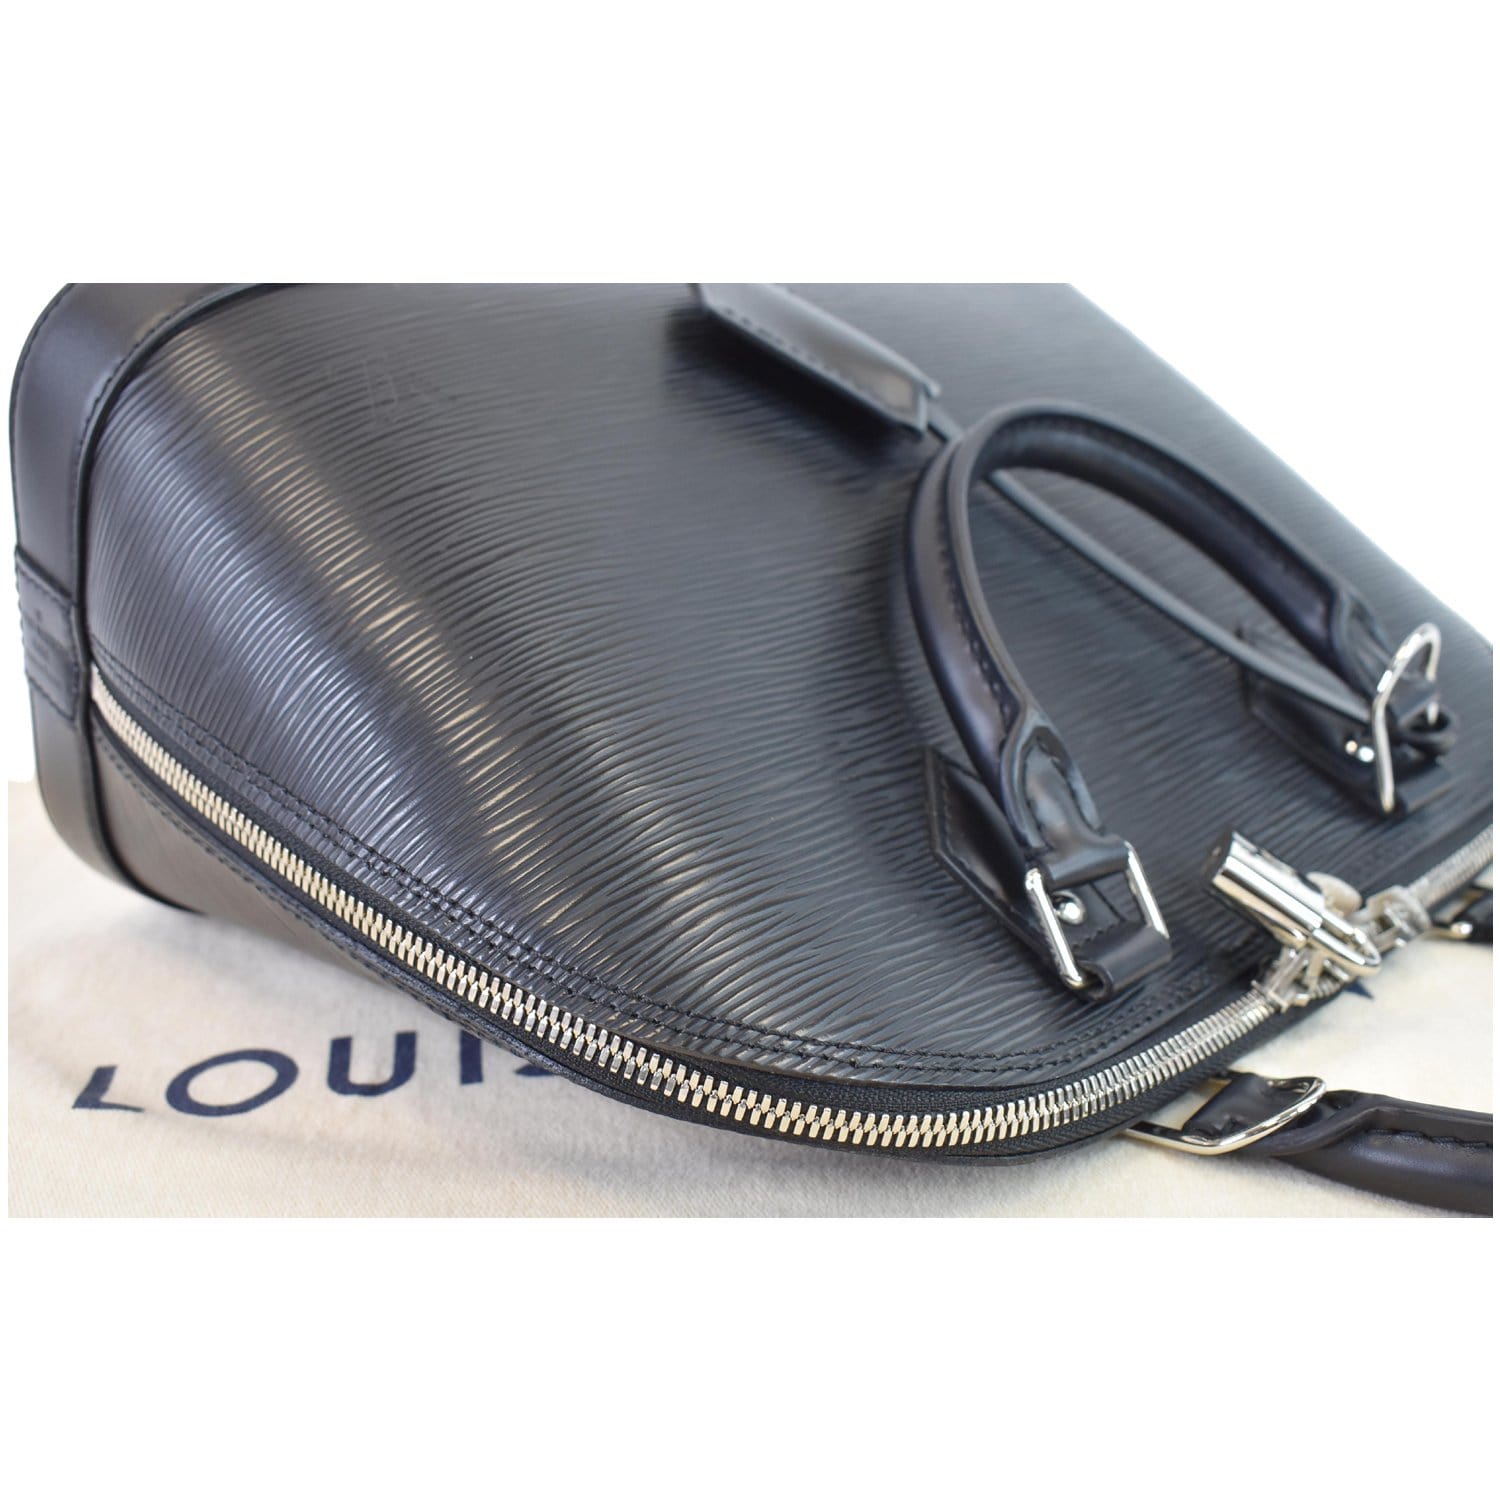 Louis Vuitton Malletage Alma Pm Quilted Black Satchel Runway Limited Edition